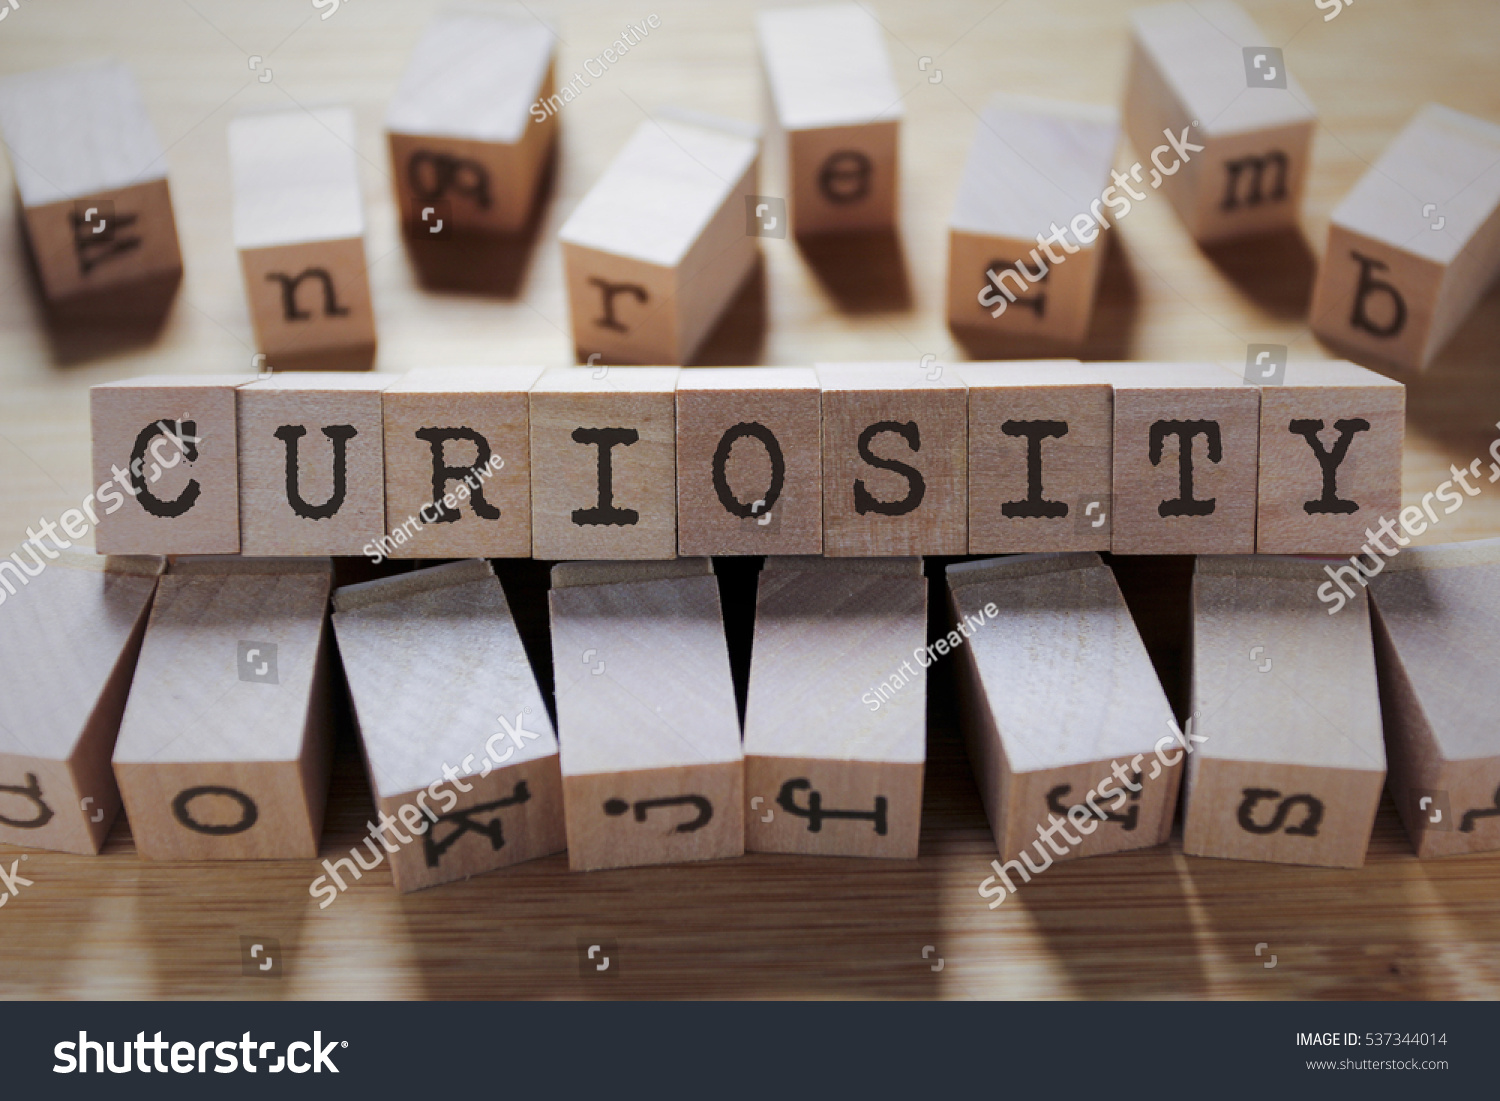 Curiosity Word In Wooden Cube #537344014